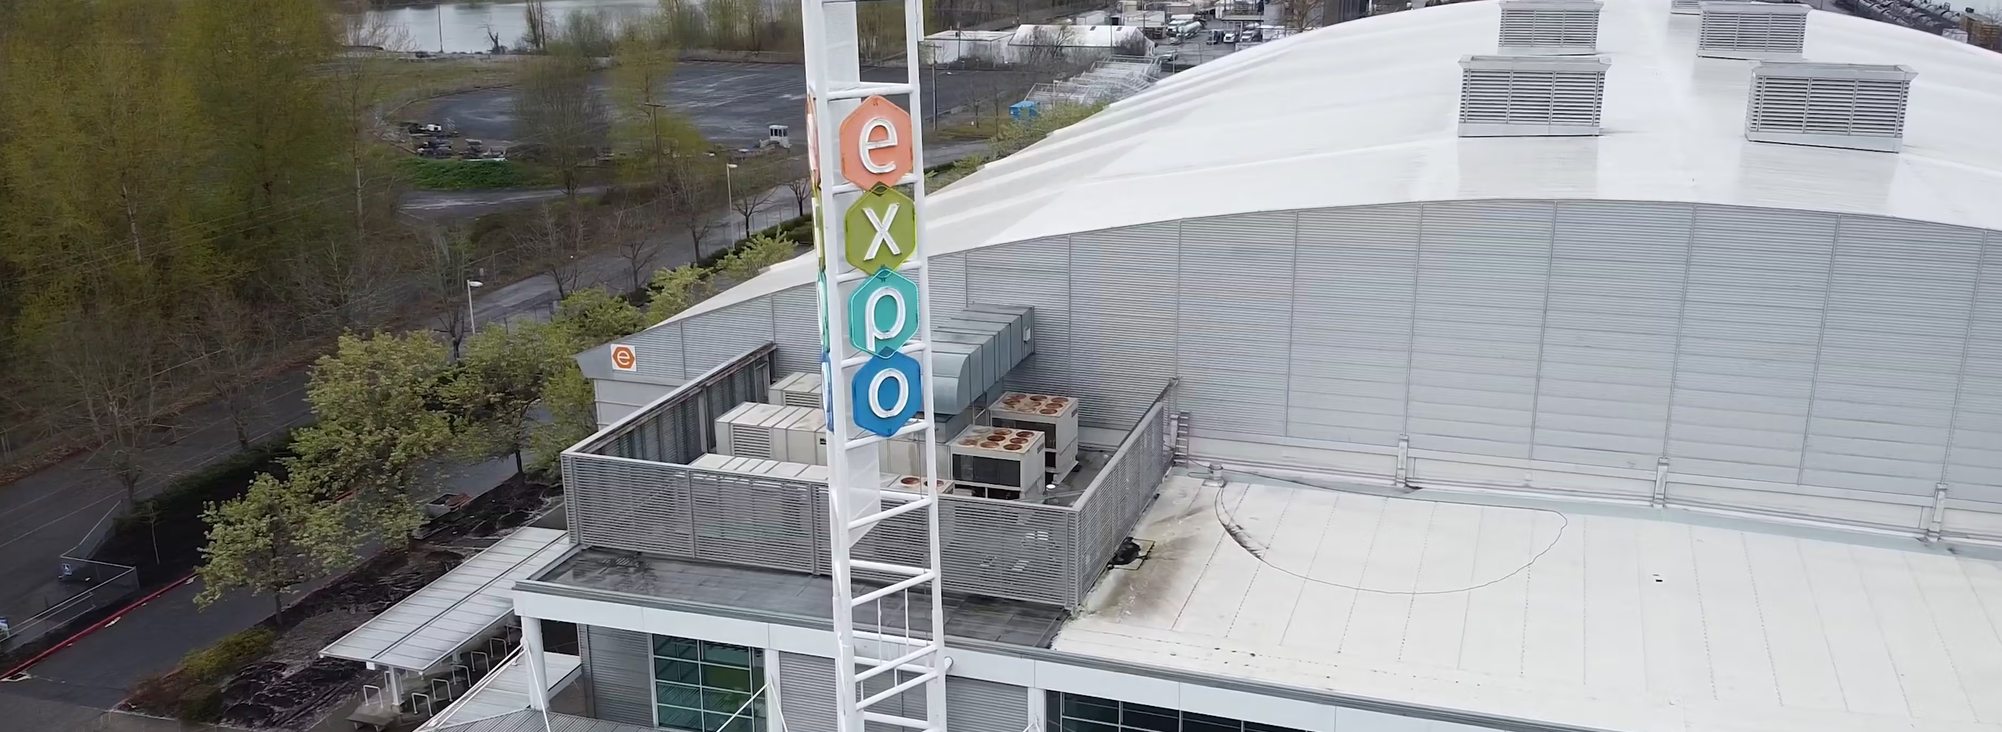 Aerial image of the Expo Center sign and front of building